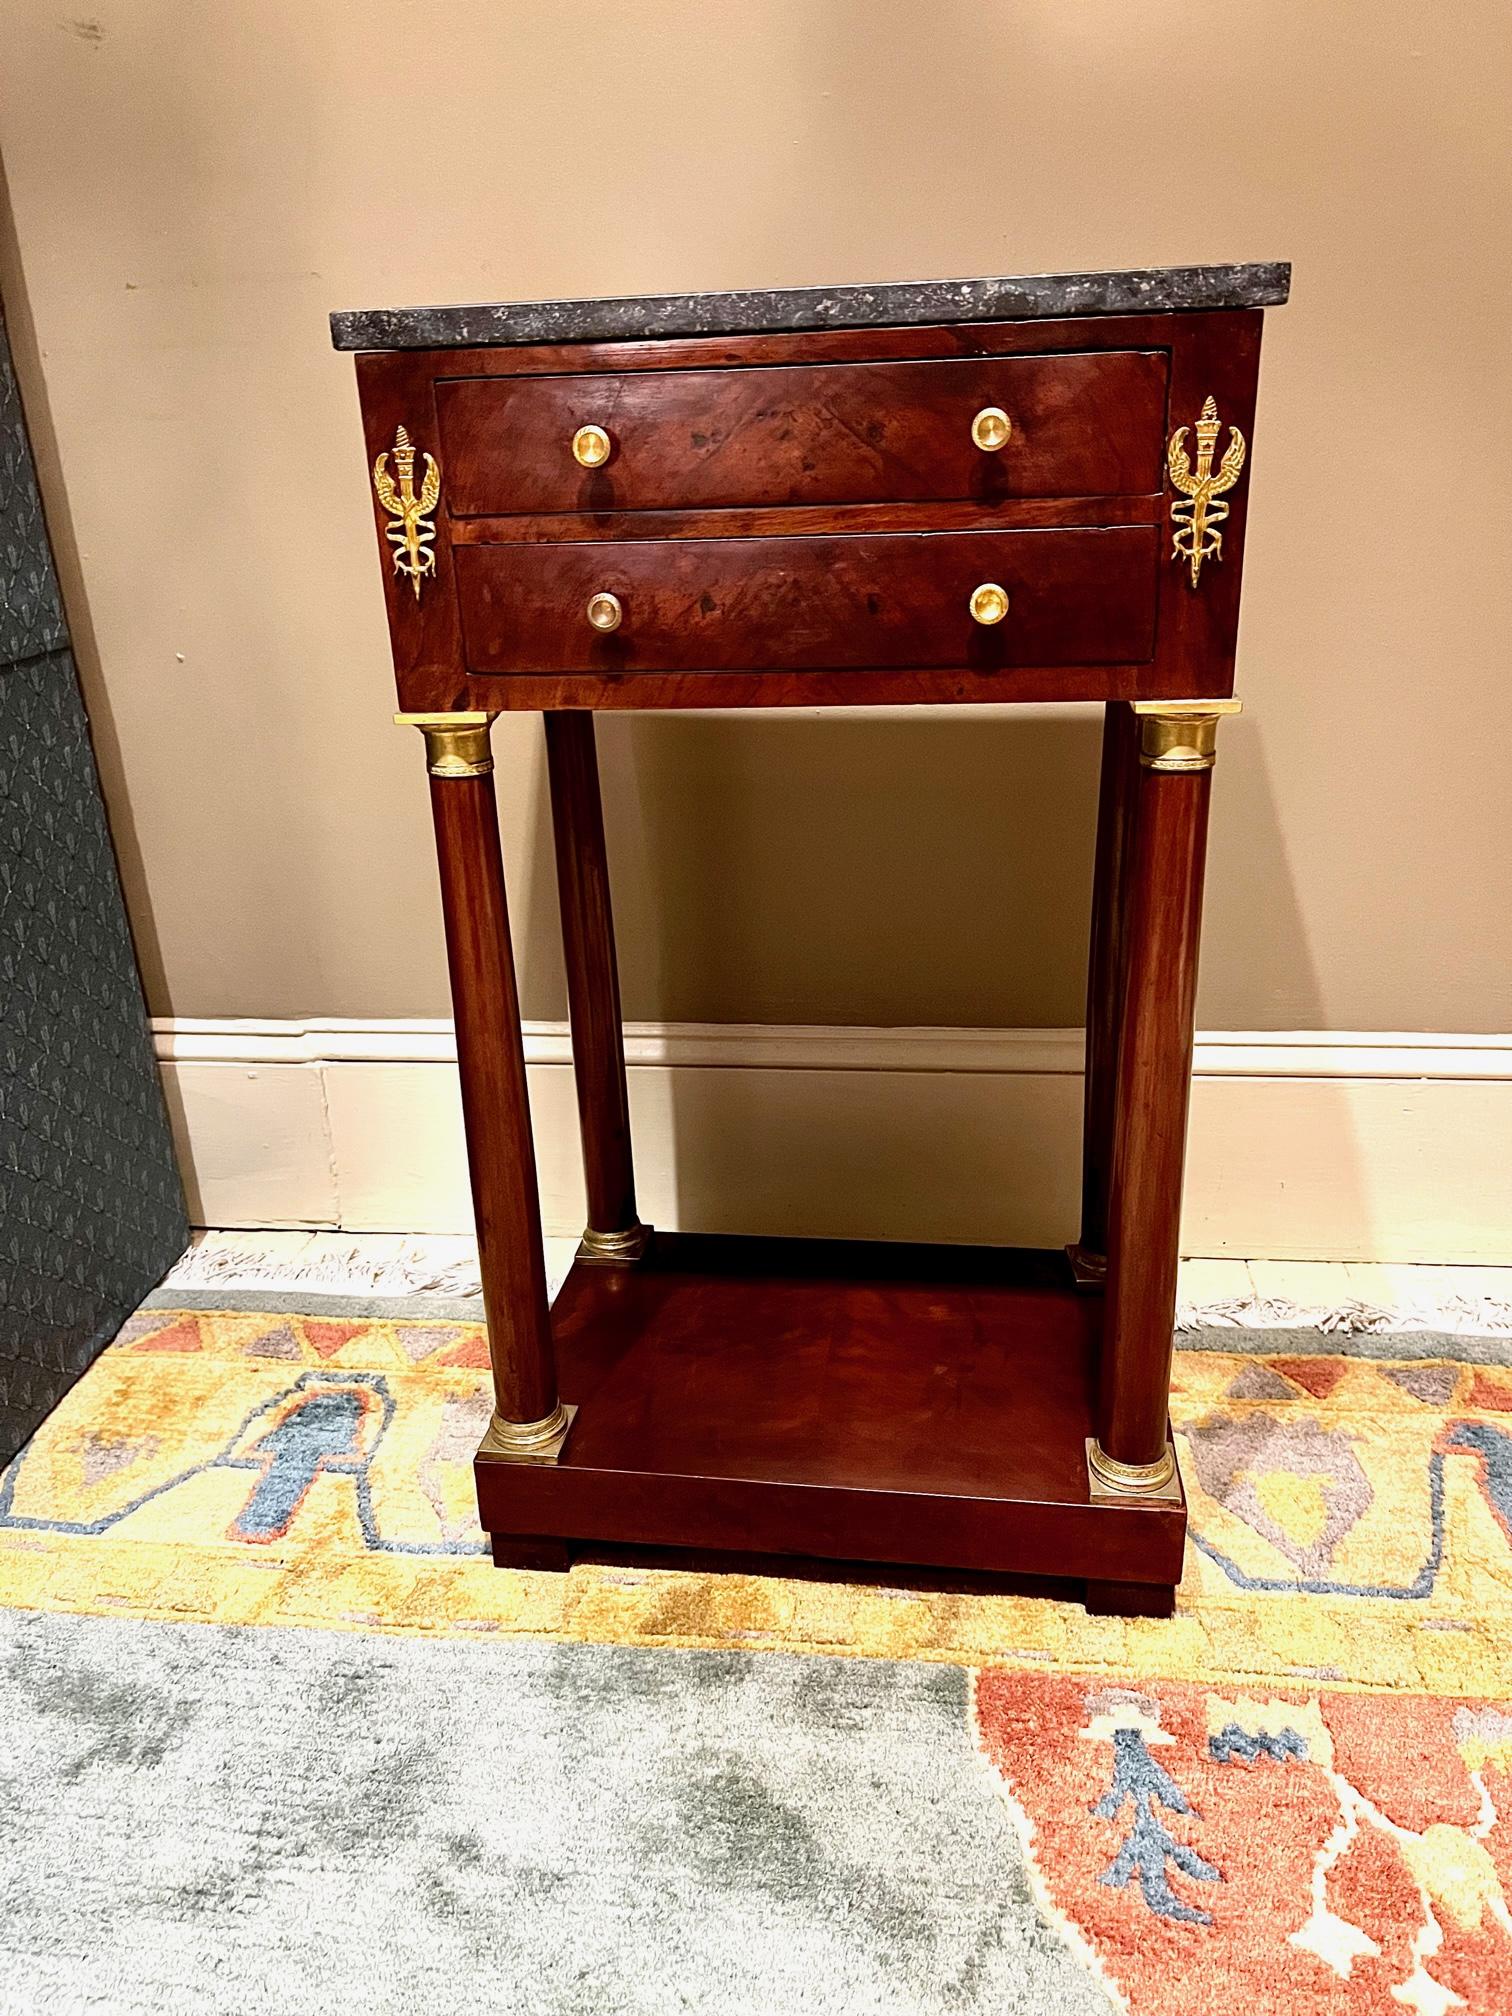 This high style 2-drawer stand is made of mahogany and mahogany book matched veneer with French pine secondary wood. The piece has a finished back, so it can be used away from the wall.  It has hand-cast gilt brass (ormolu) mounts and pulls. The top